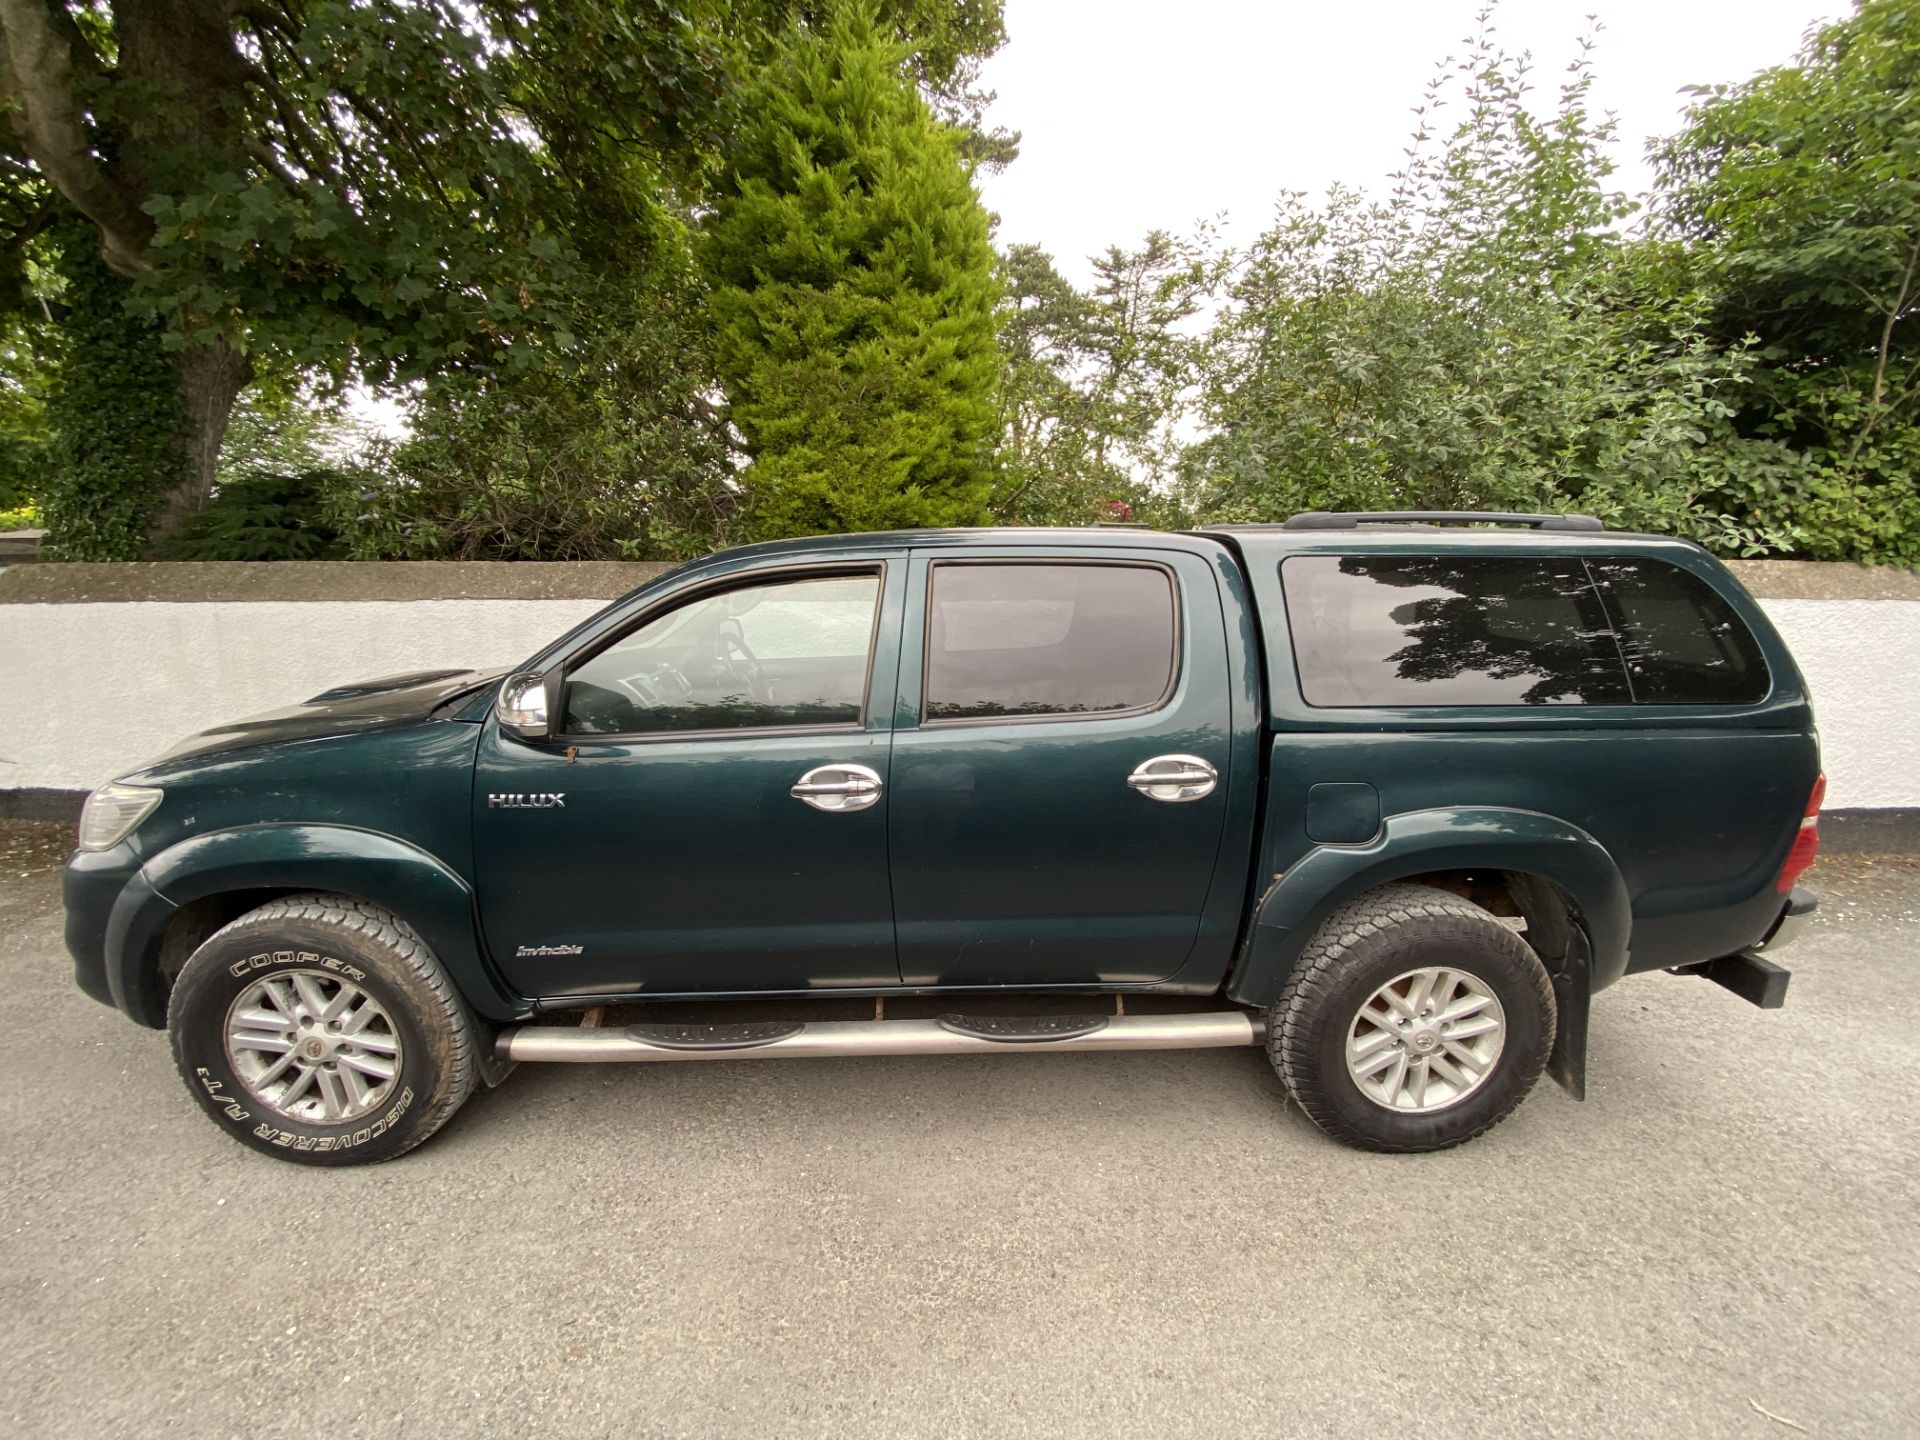 2012 TOYOTA HILUX INVINCIBLE. JEEP.LOCATION NORTHERN IRELAND. - Image 6 of 19